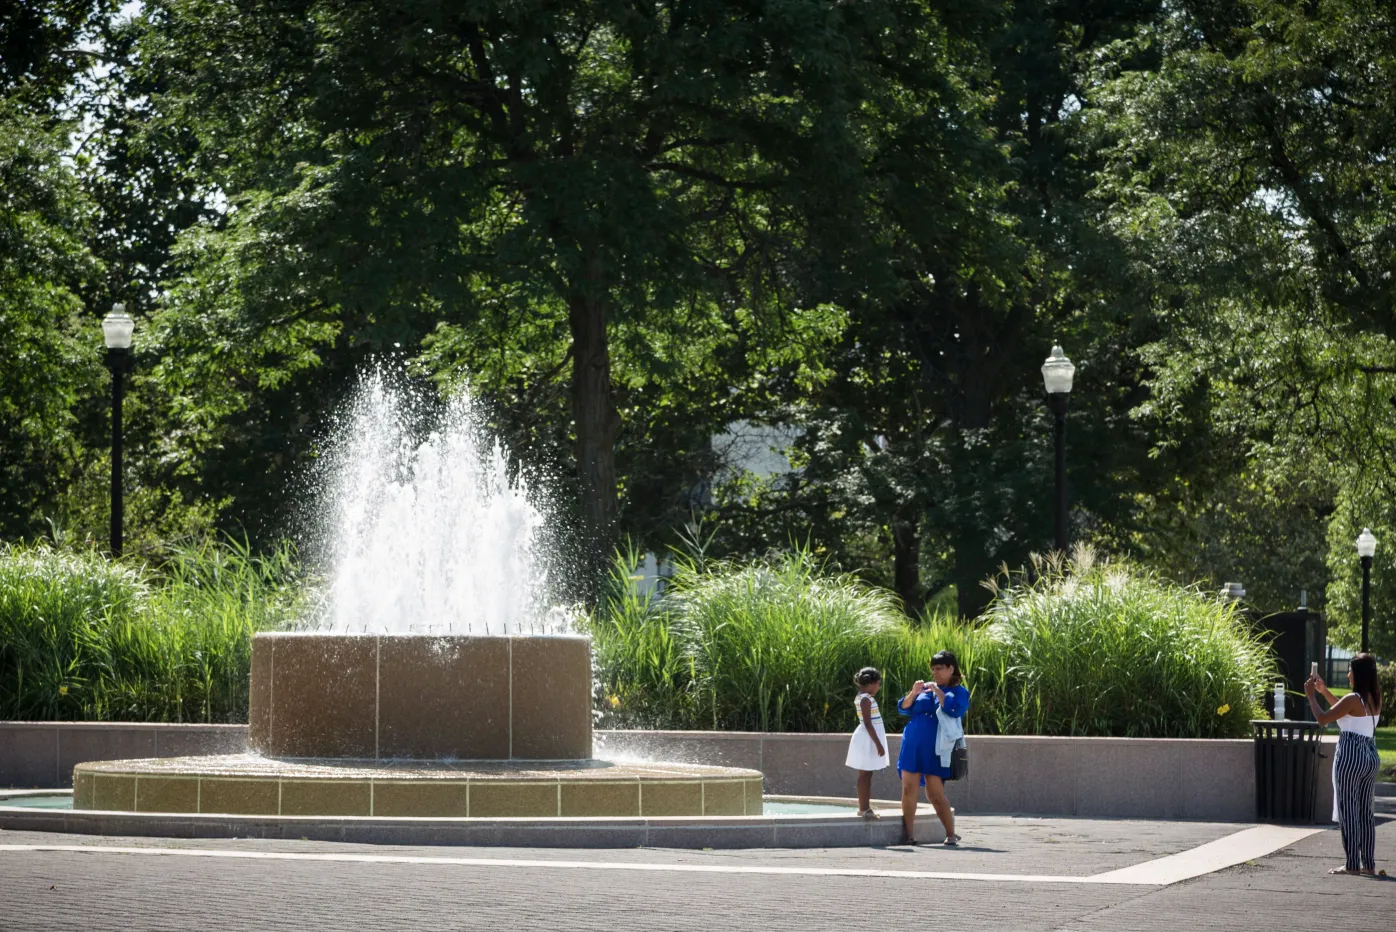 A young girl poses for the camera in front of one of the DIA fountains